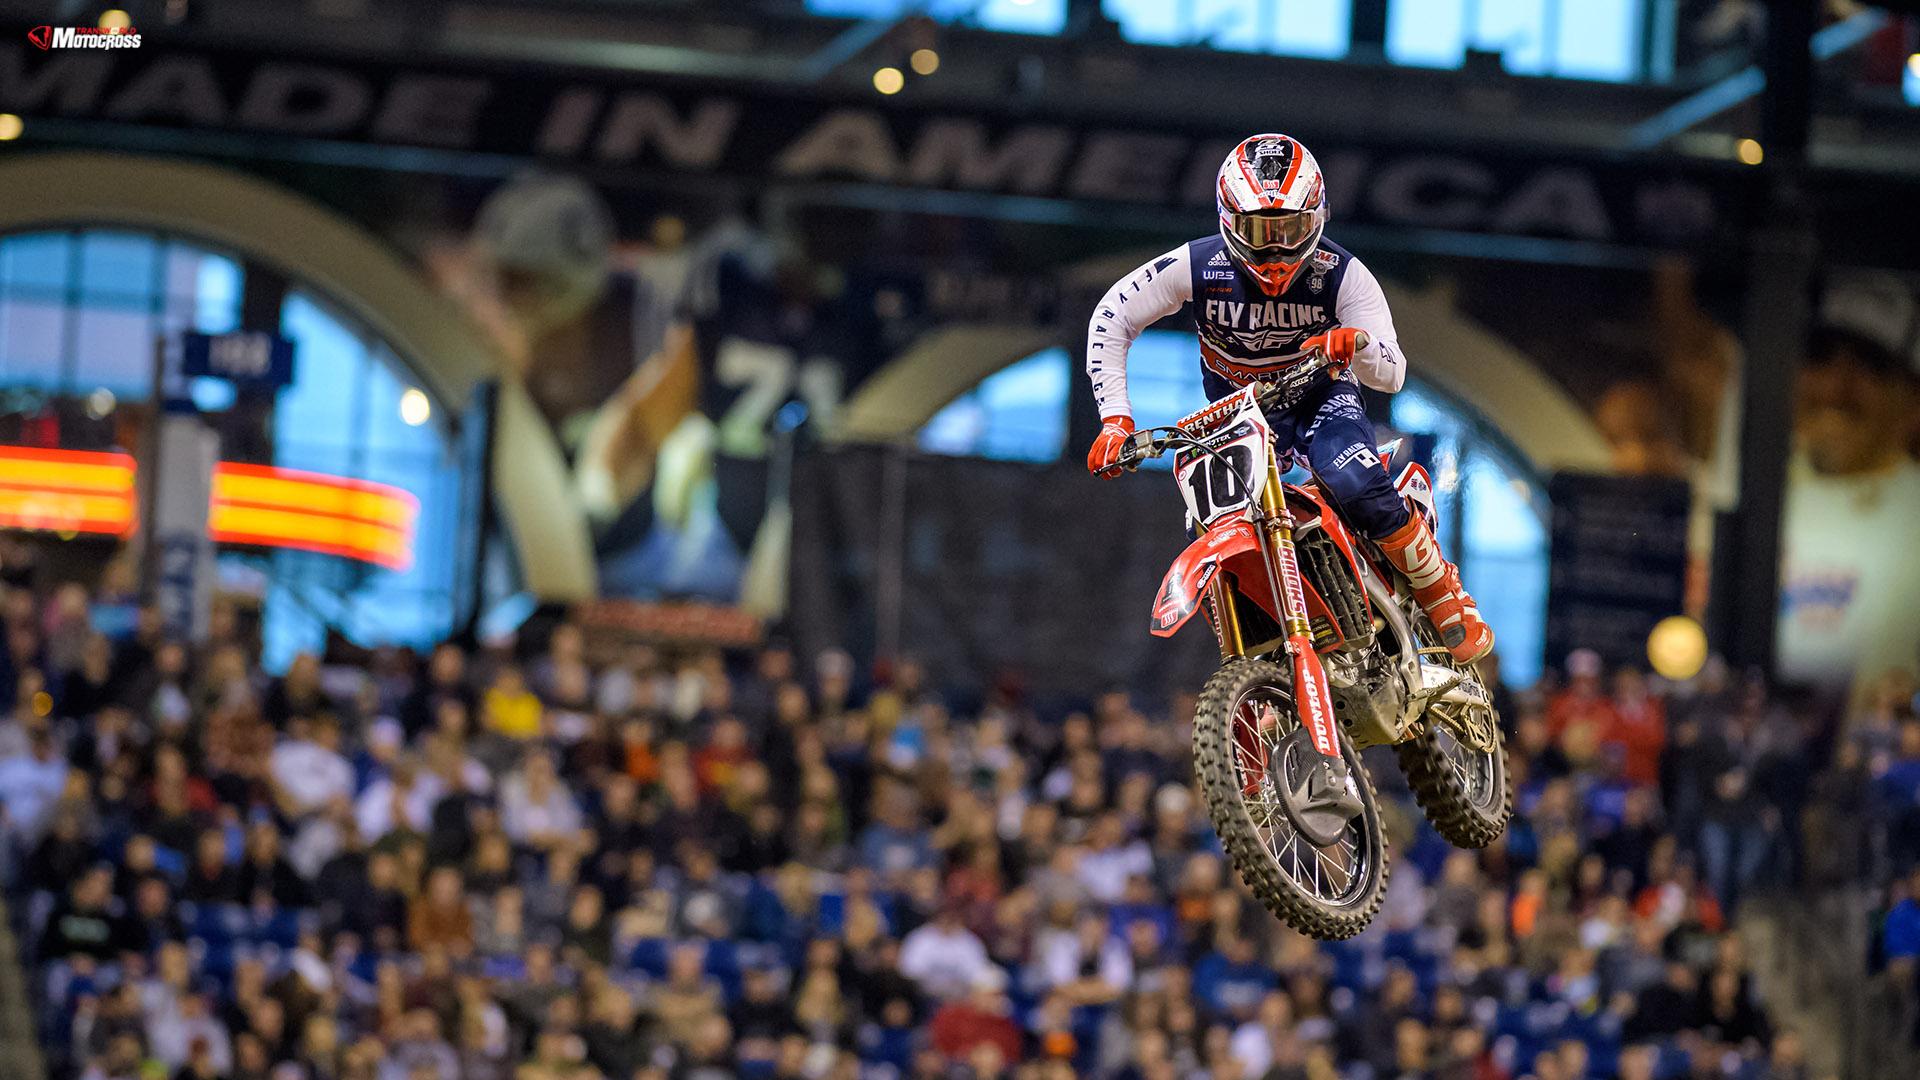 Wednesday Wallpaper From 2018 Indianapolis Supercross